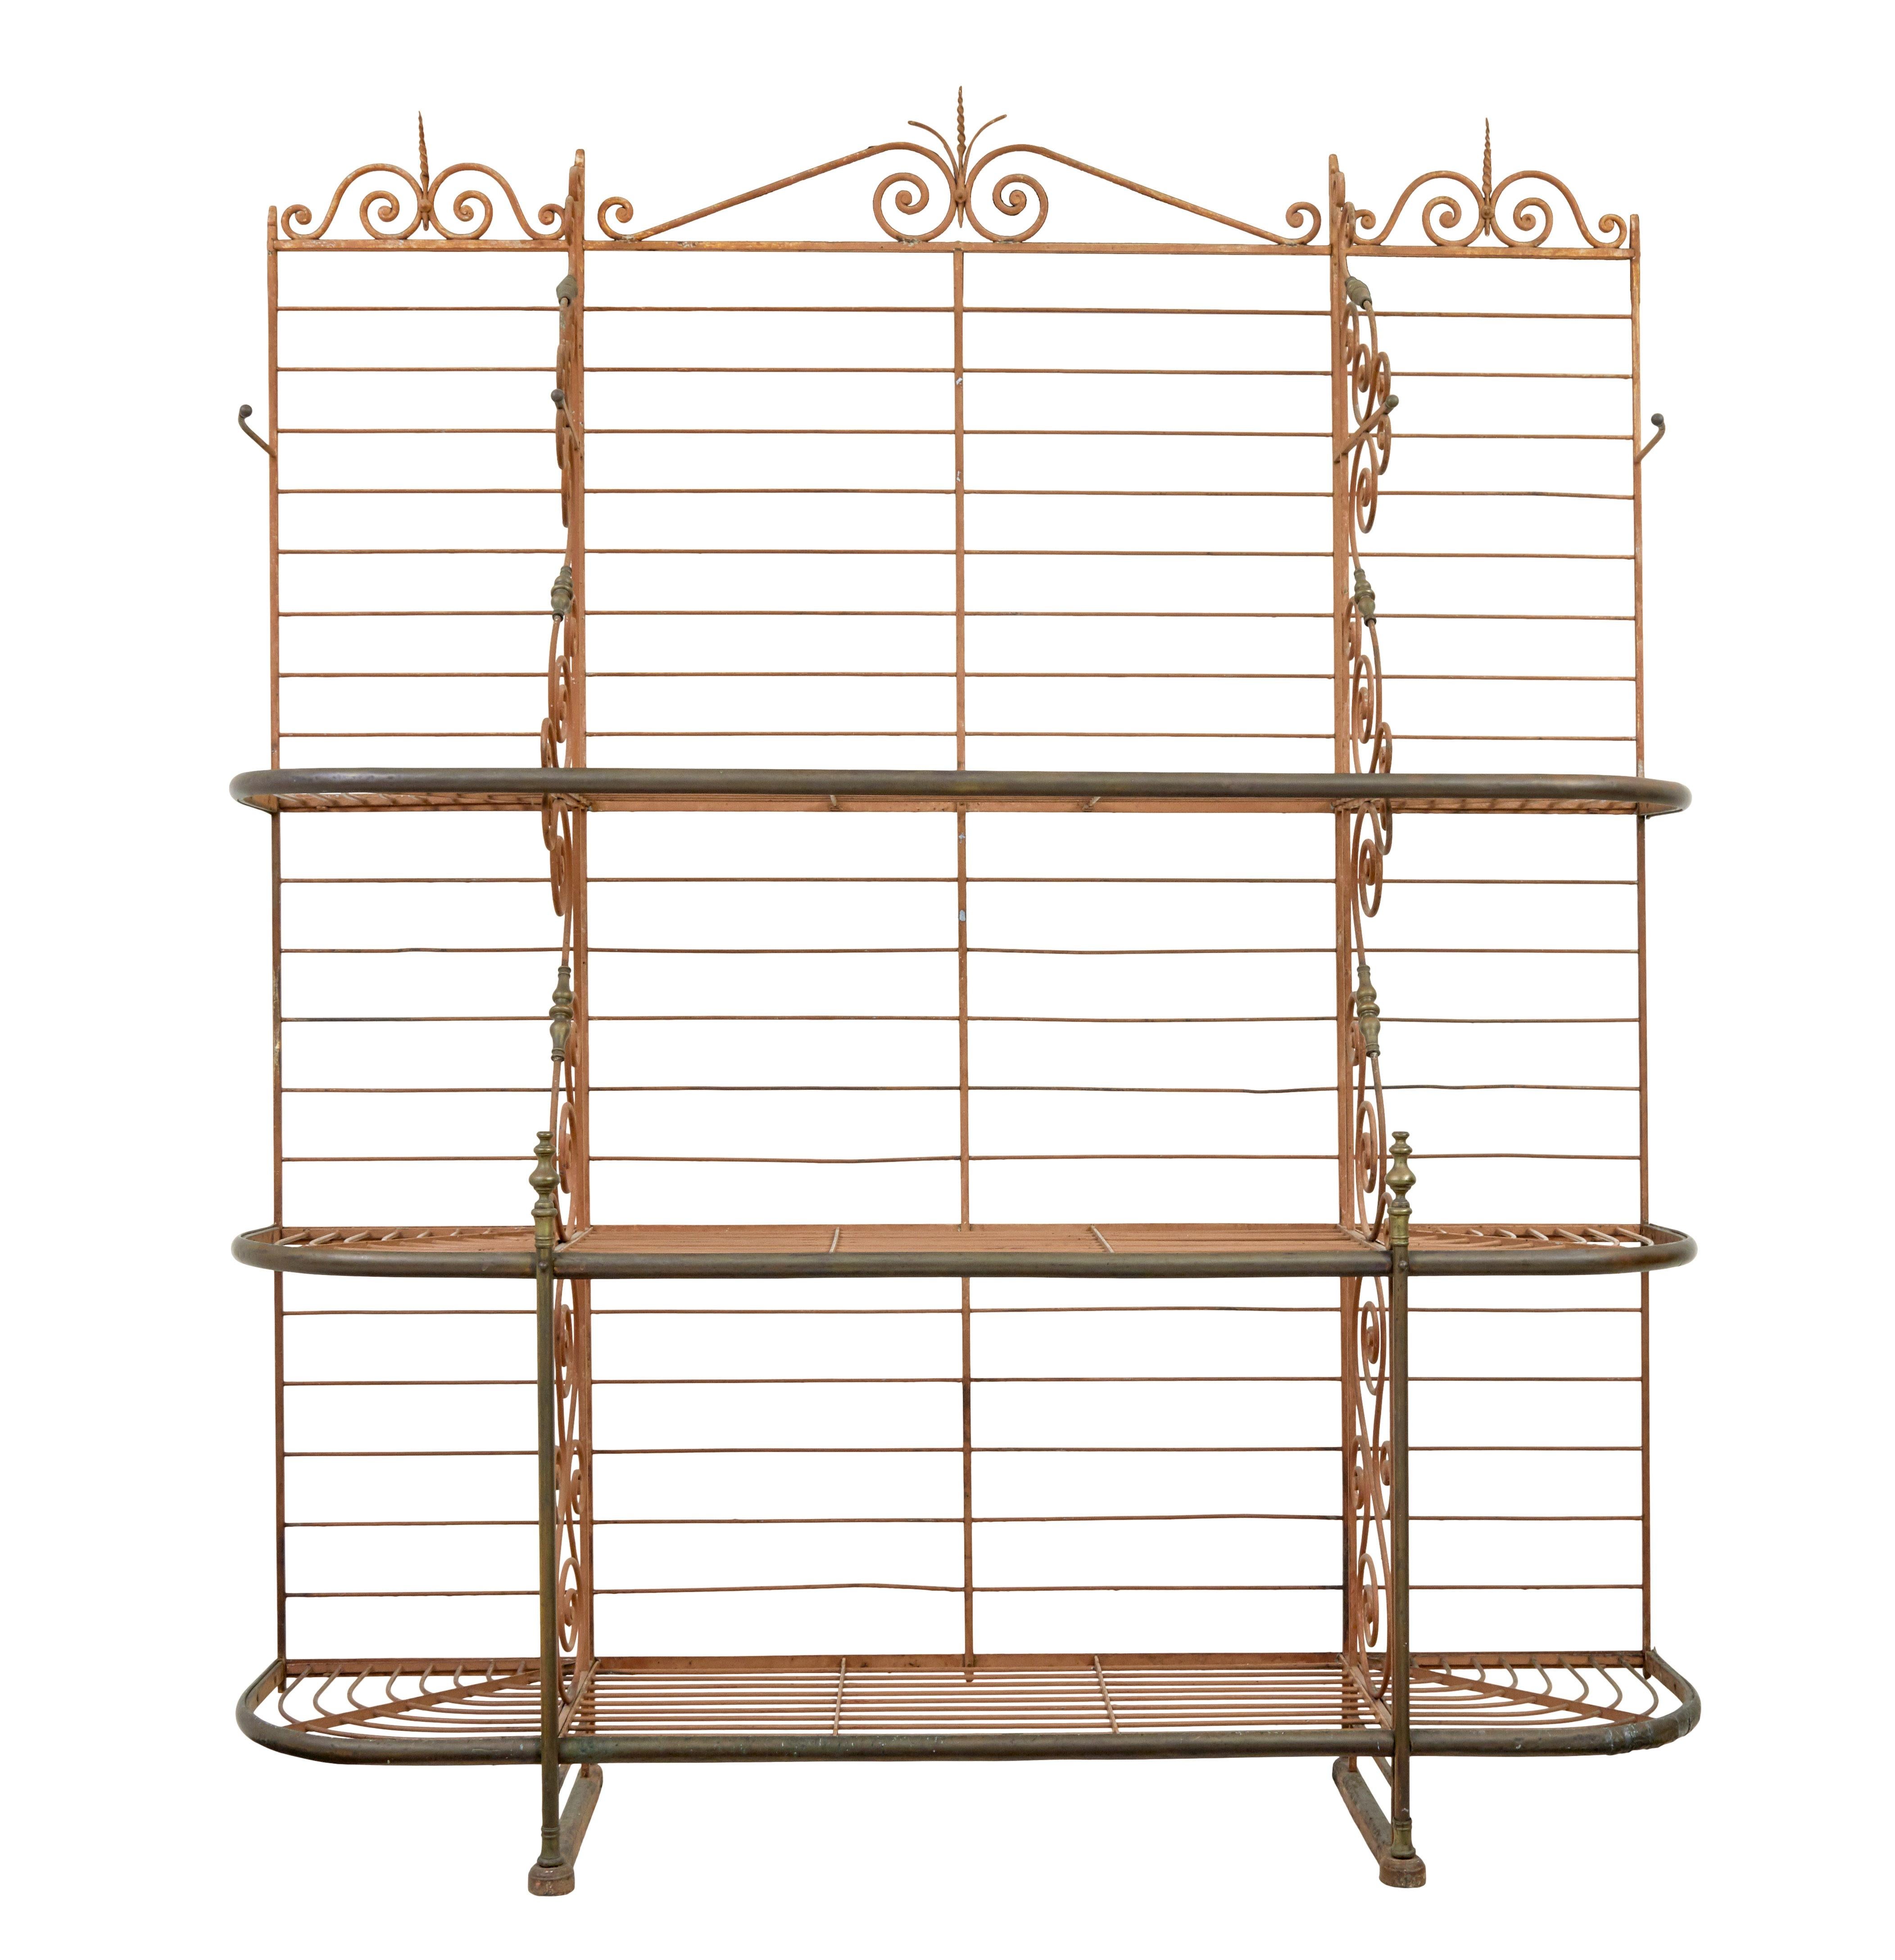 Early 20th century French Parisienne boulangers bread rack circa 1900.

Superb quality boulangerie baguette rack, of large proportions.  Made from iron with various detailing such as twists and monkey tails. 3 shelves with 2 partitions running the